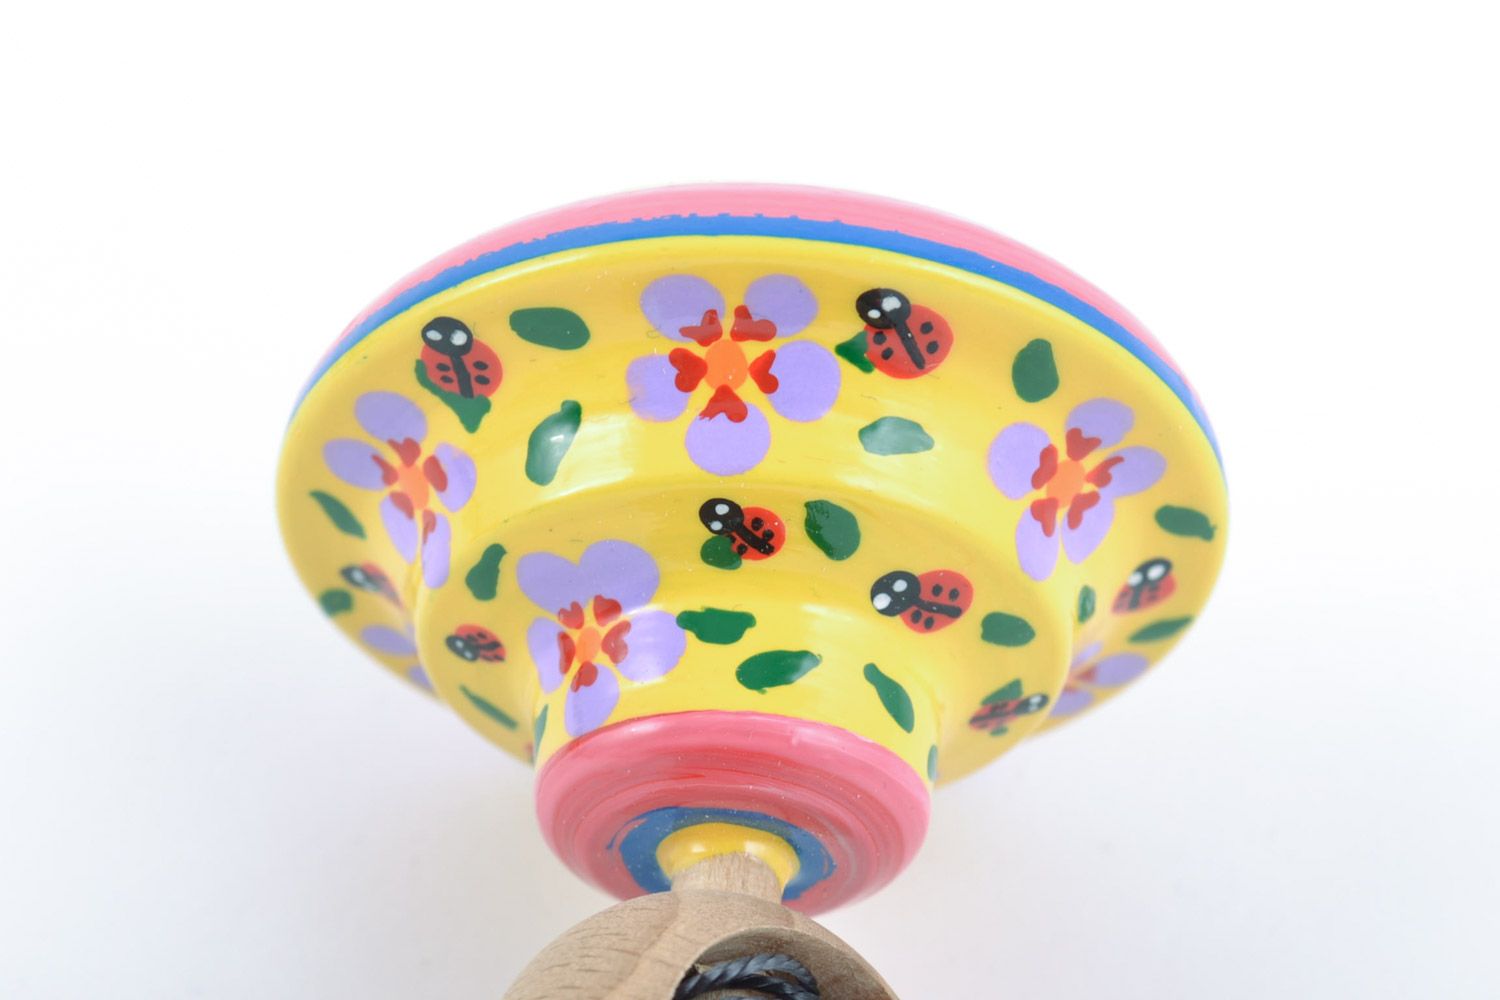 Handmade educational wooden eco toy spinning top painted in yellow color palette photo 4